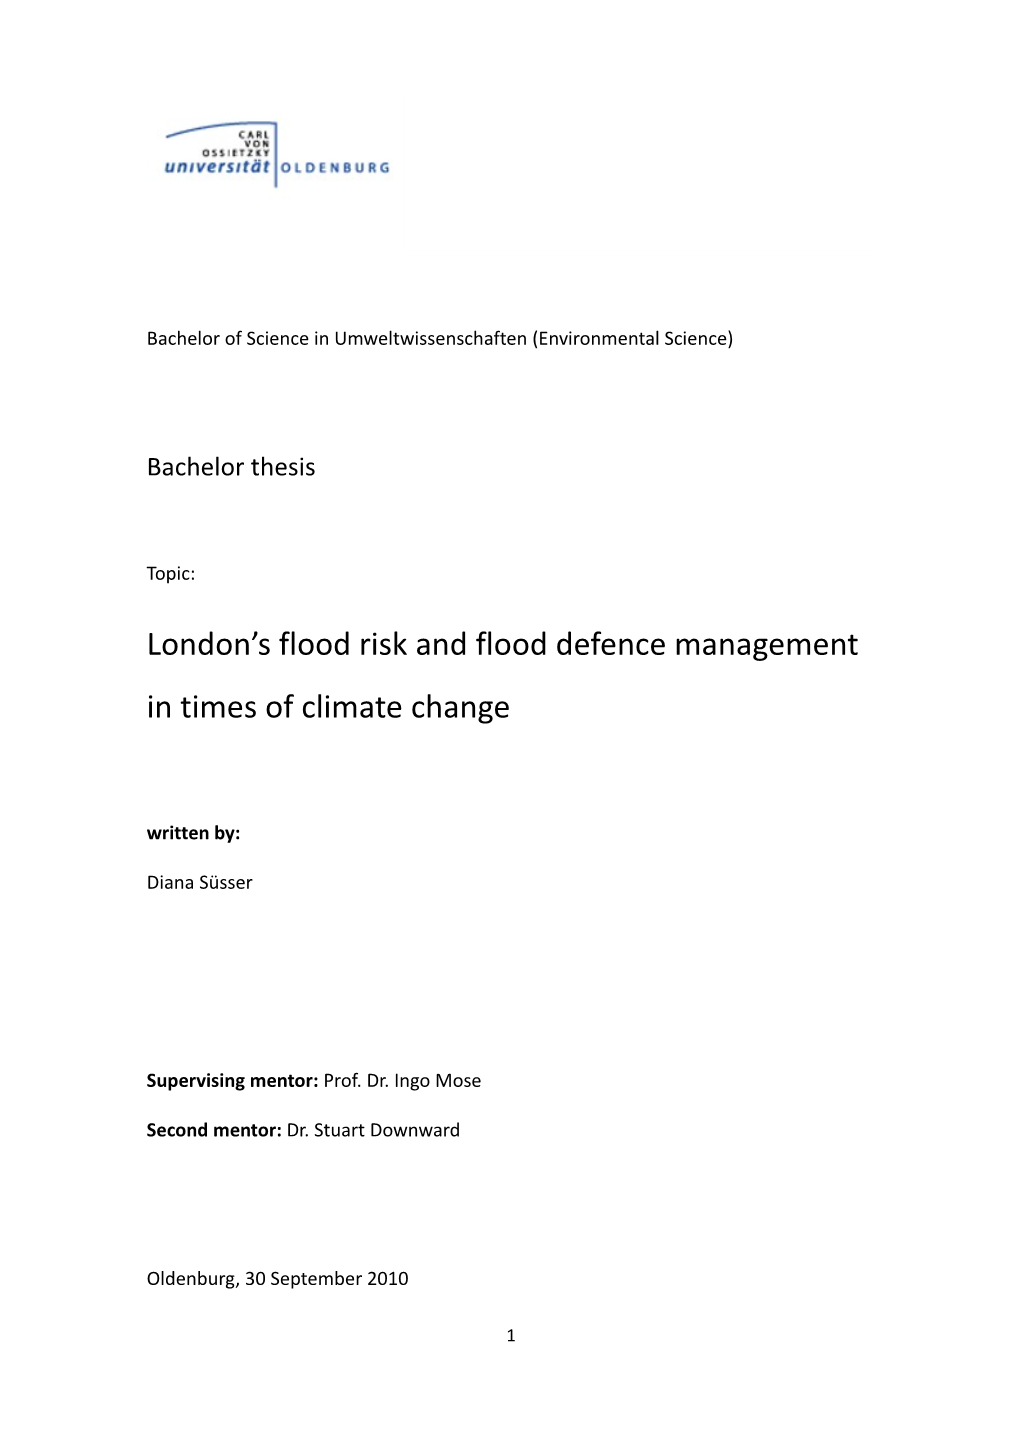 London's Flood Risk and Flood Defence Management in Times of Climate